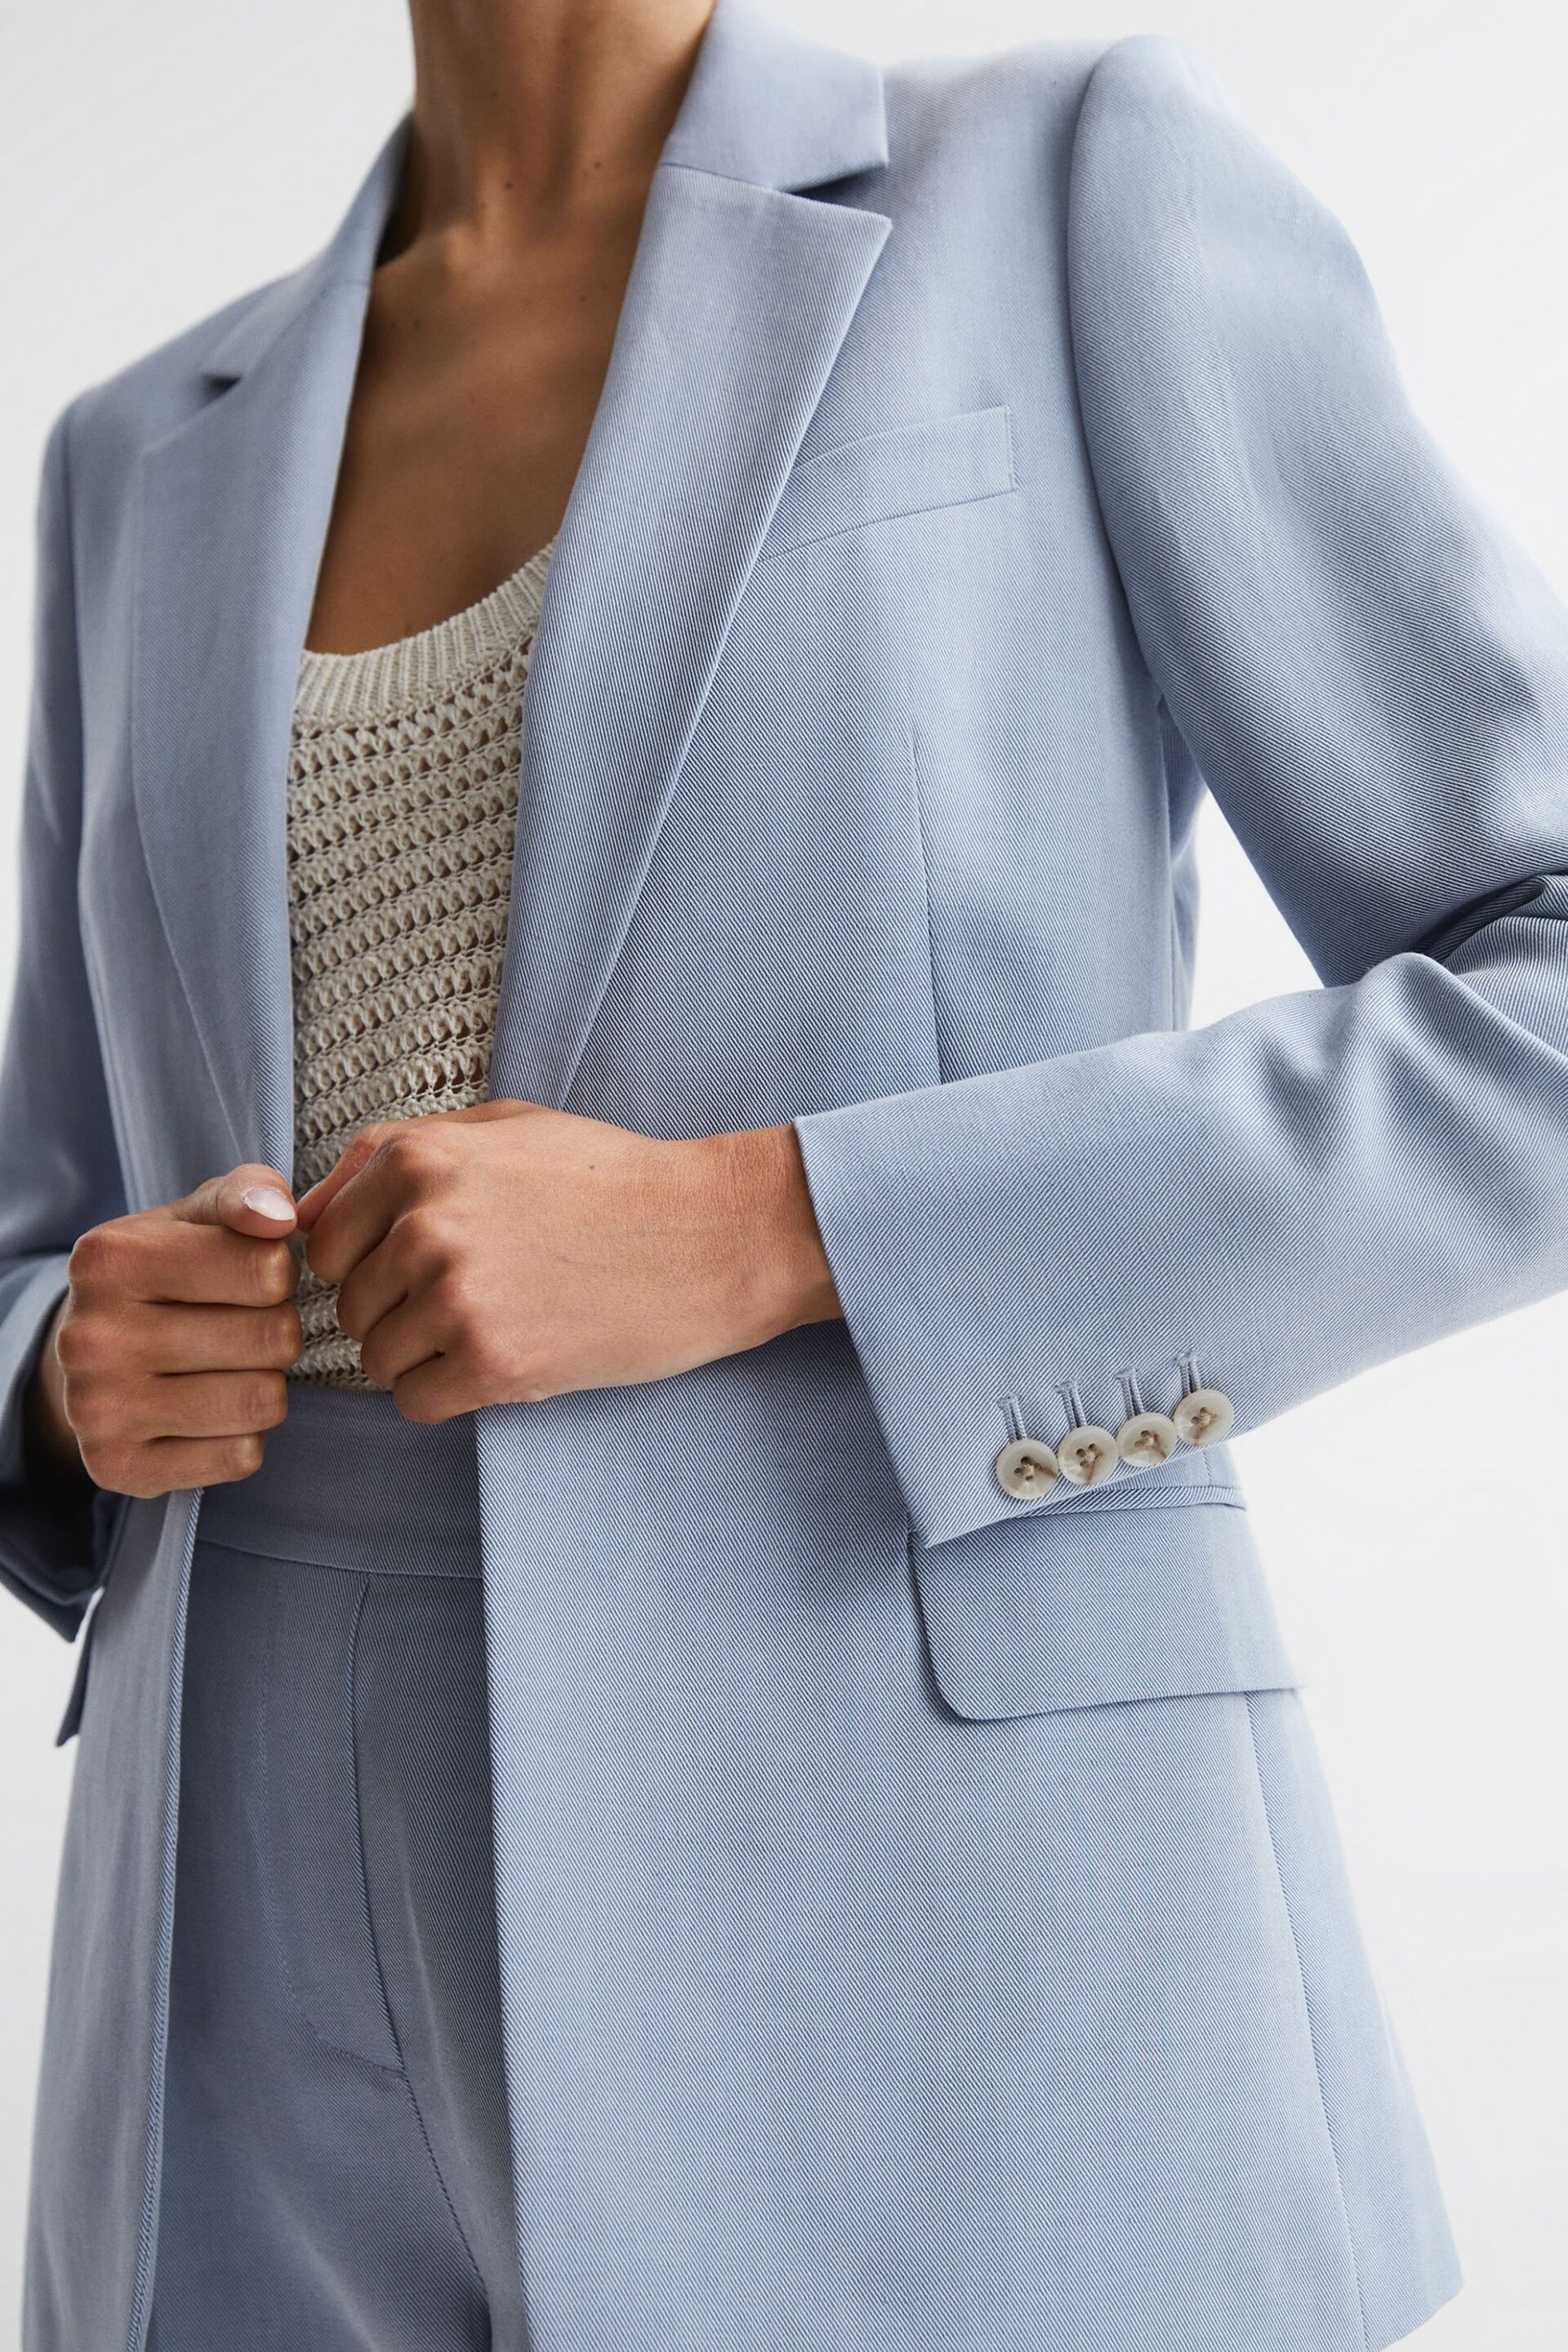 Reiss Pale Blue Shae Single Breasted Tailored Blazer - Image 4 of 7